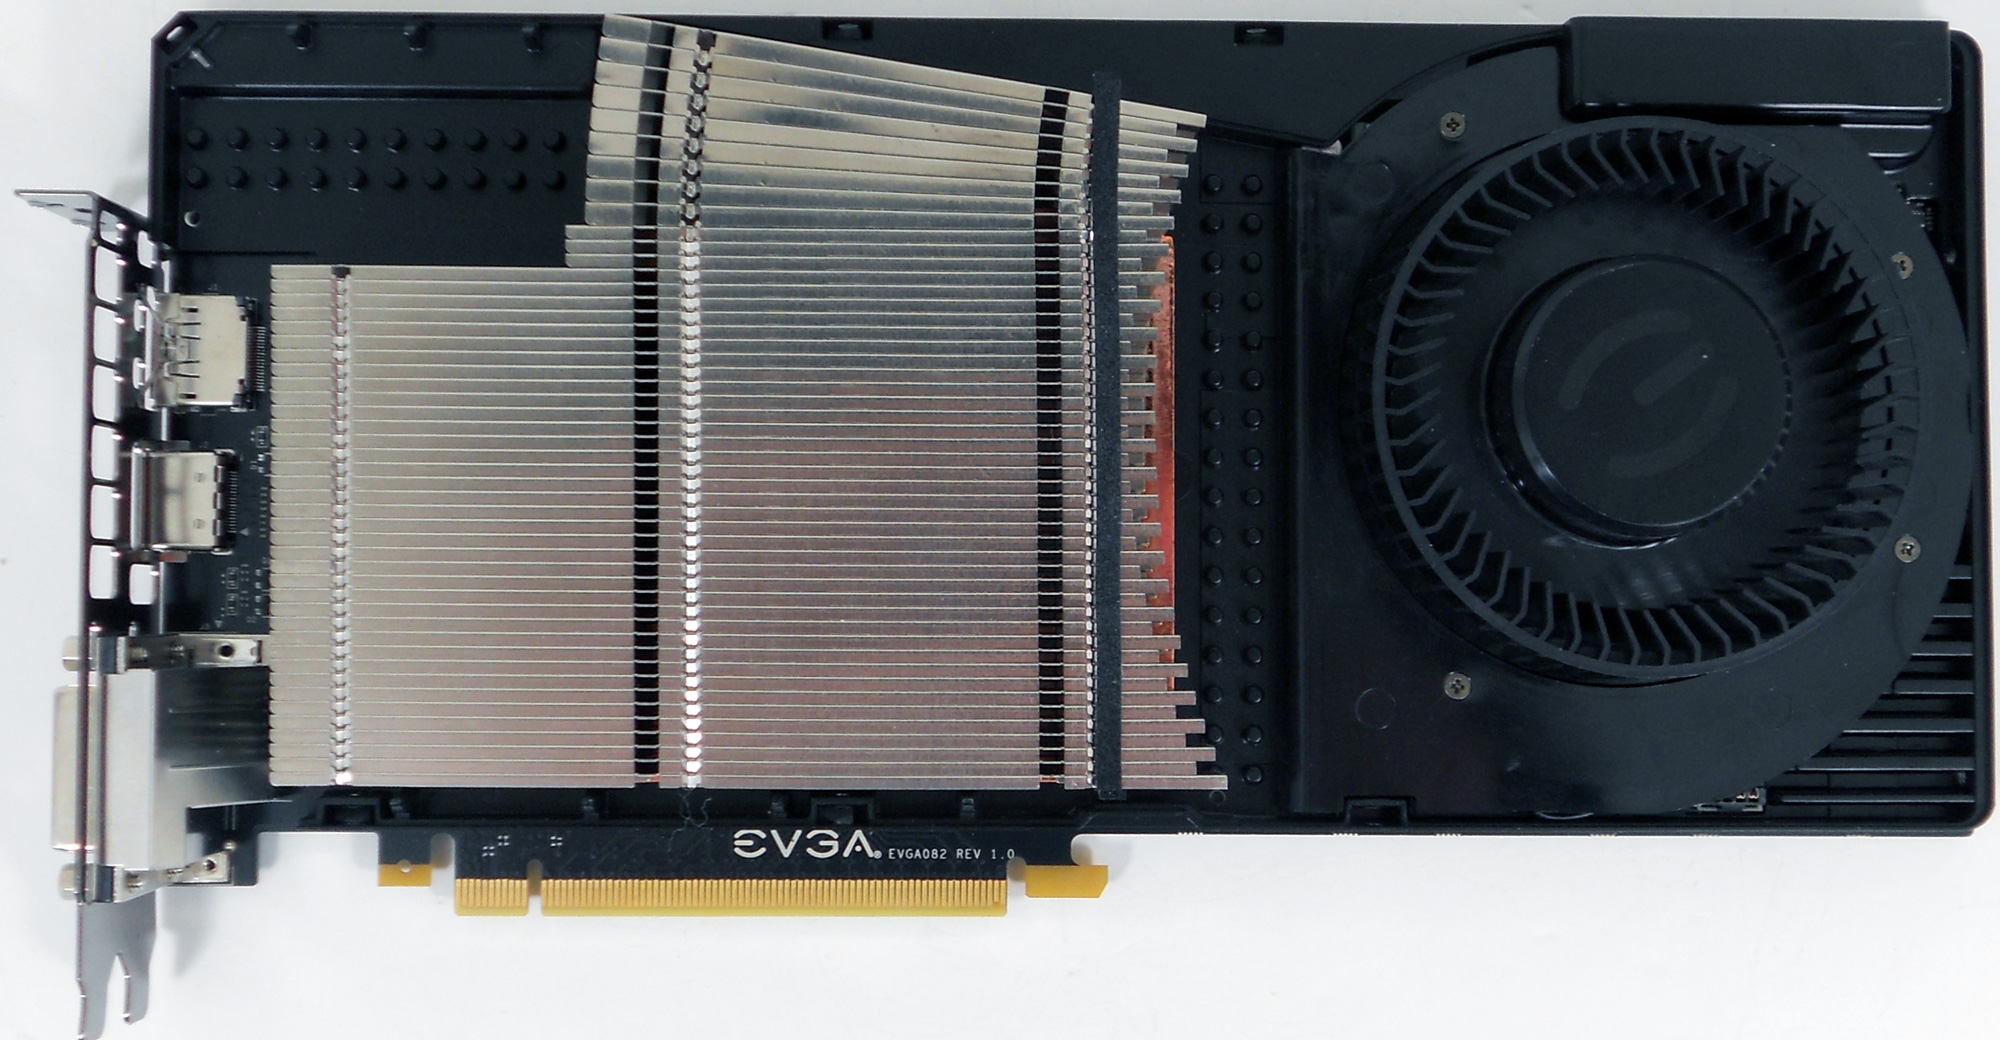 EVGA GeForce GTX 680 Classified Review 